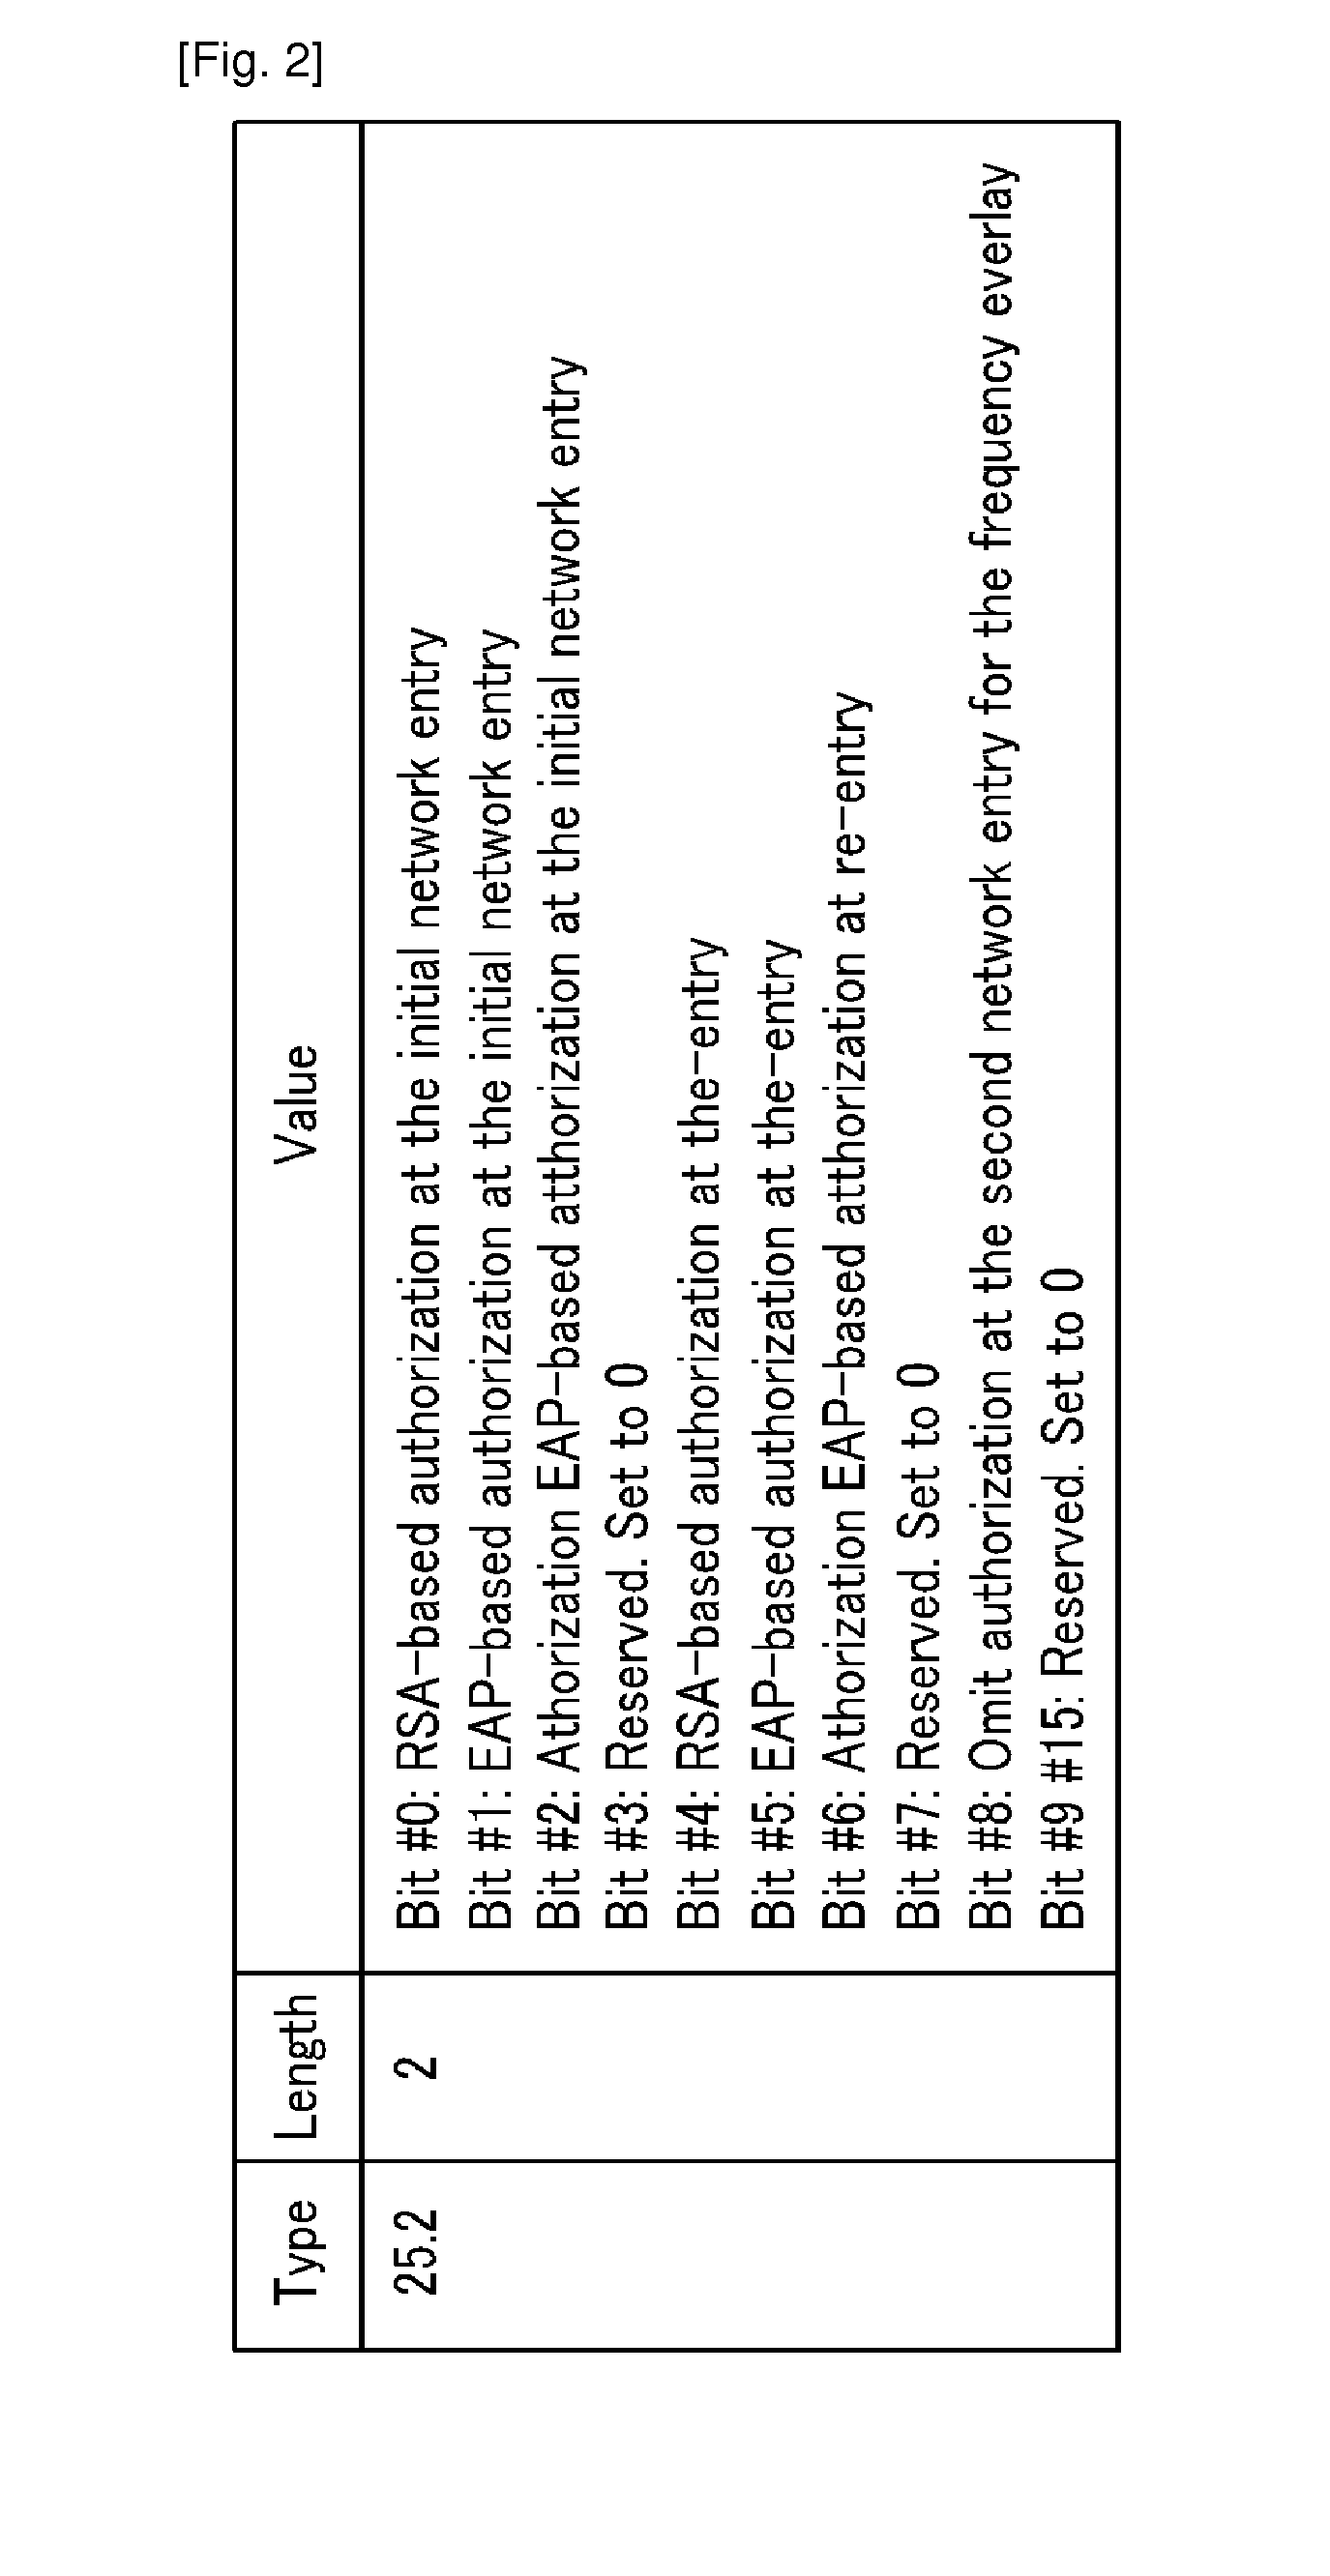 Method for generating authorization key and method for negotiating authorization in communication system based on frequency overlay